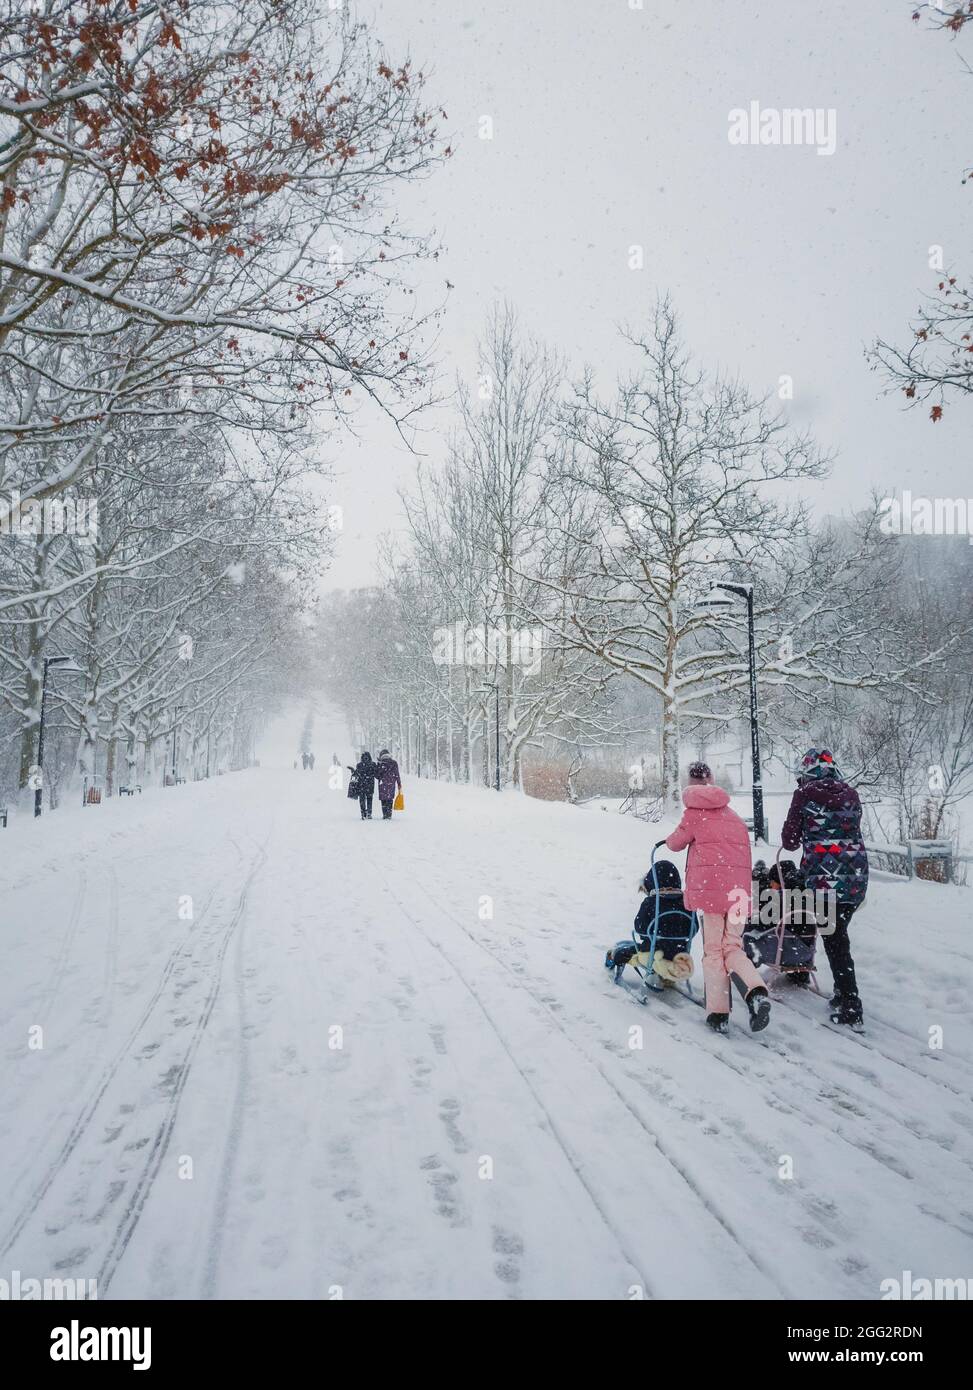 Beautiful scene in the winter park with two mothers walking their childs on a sleigh ride. Idyllic and peaceful scene with fluffy snowflakes falling f Stock Photo